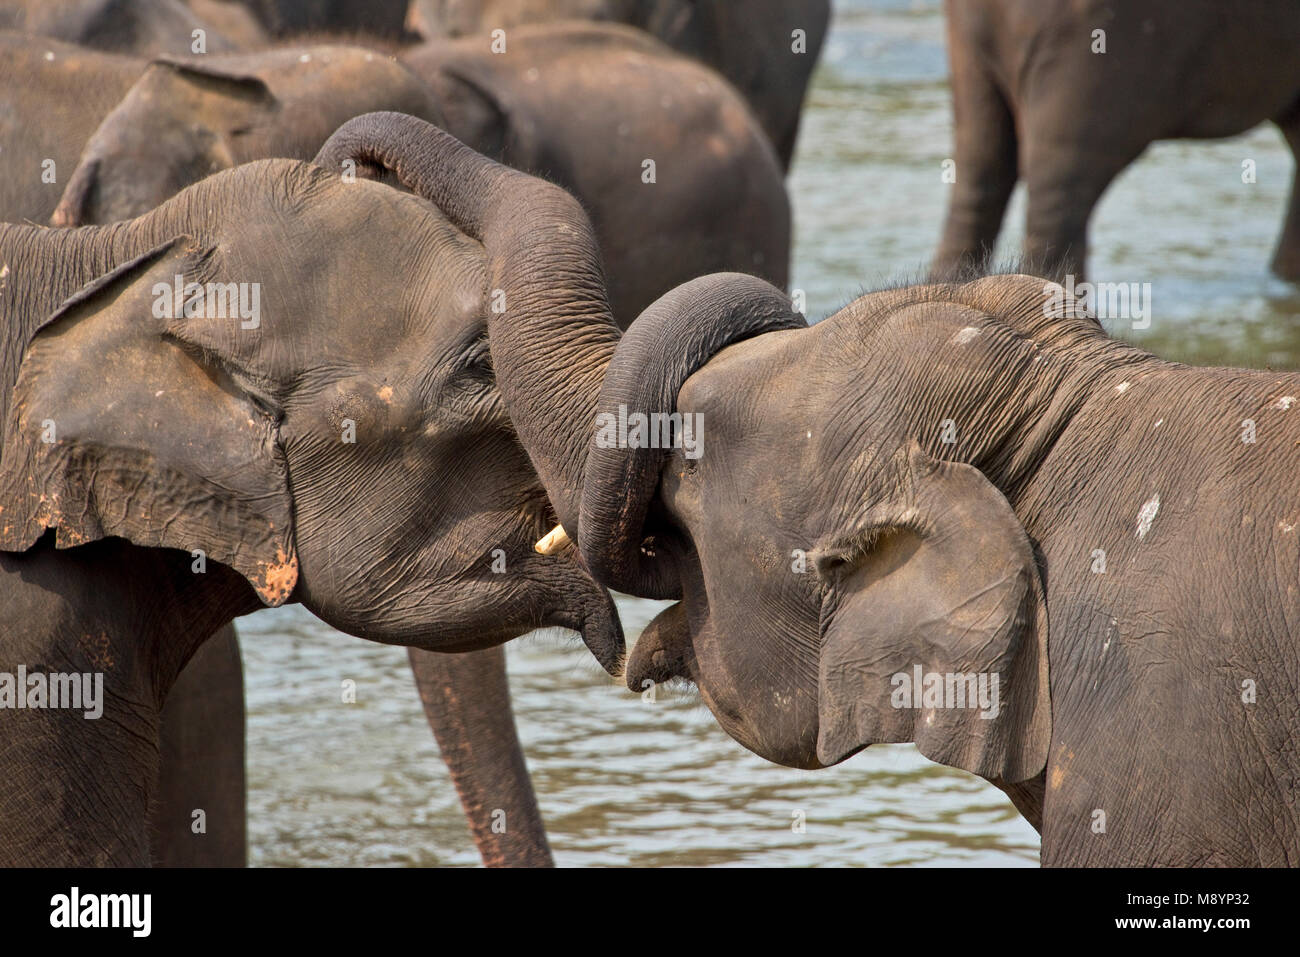 2 Young Sri Lankan elephants from the Pinnawala Elephant Orphanage best friends bathing in the river. Stock Photo